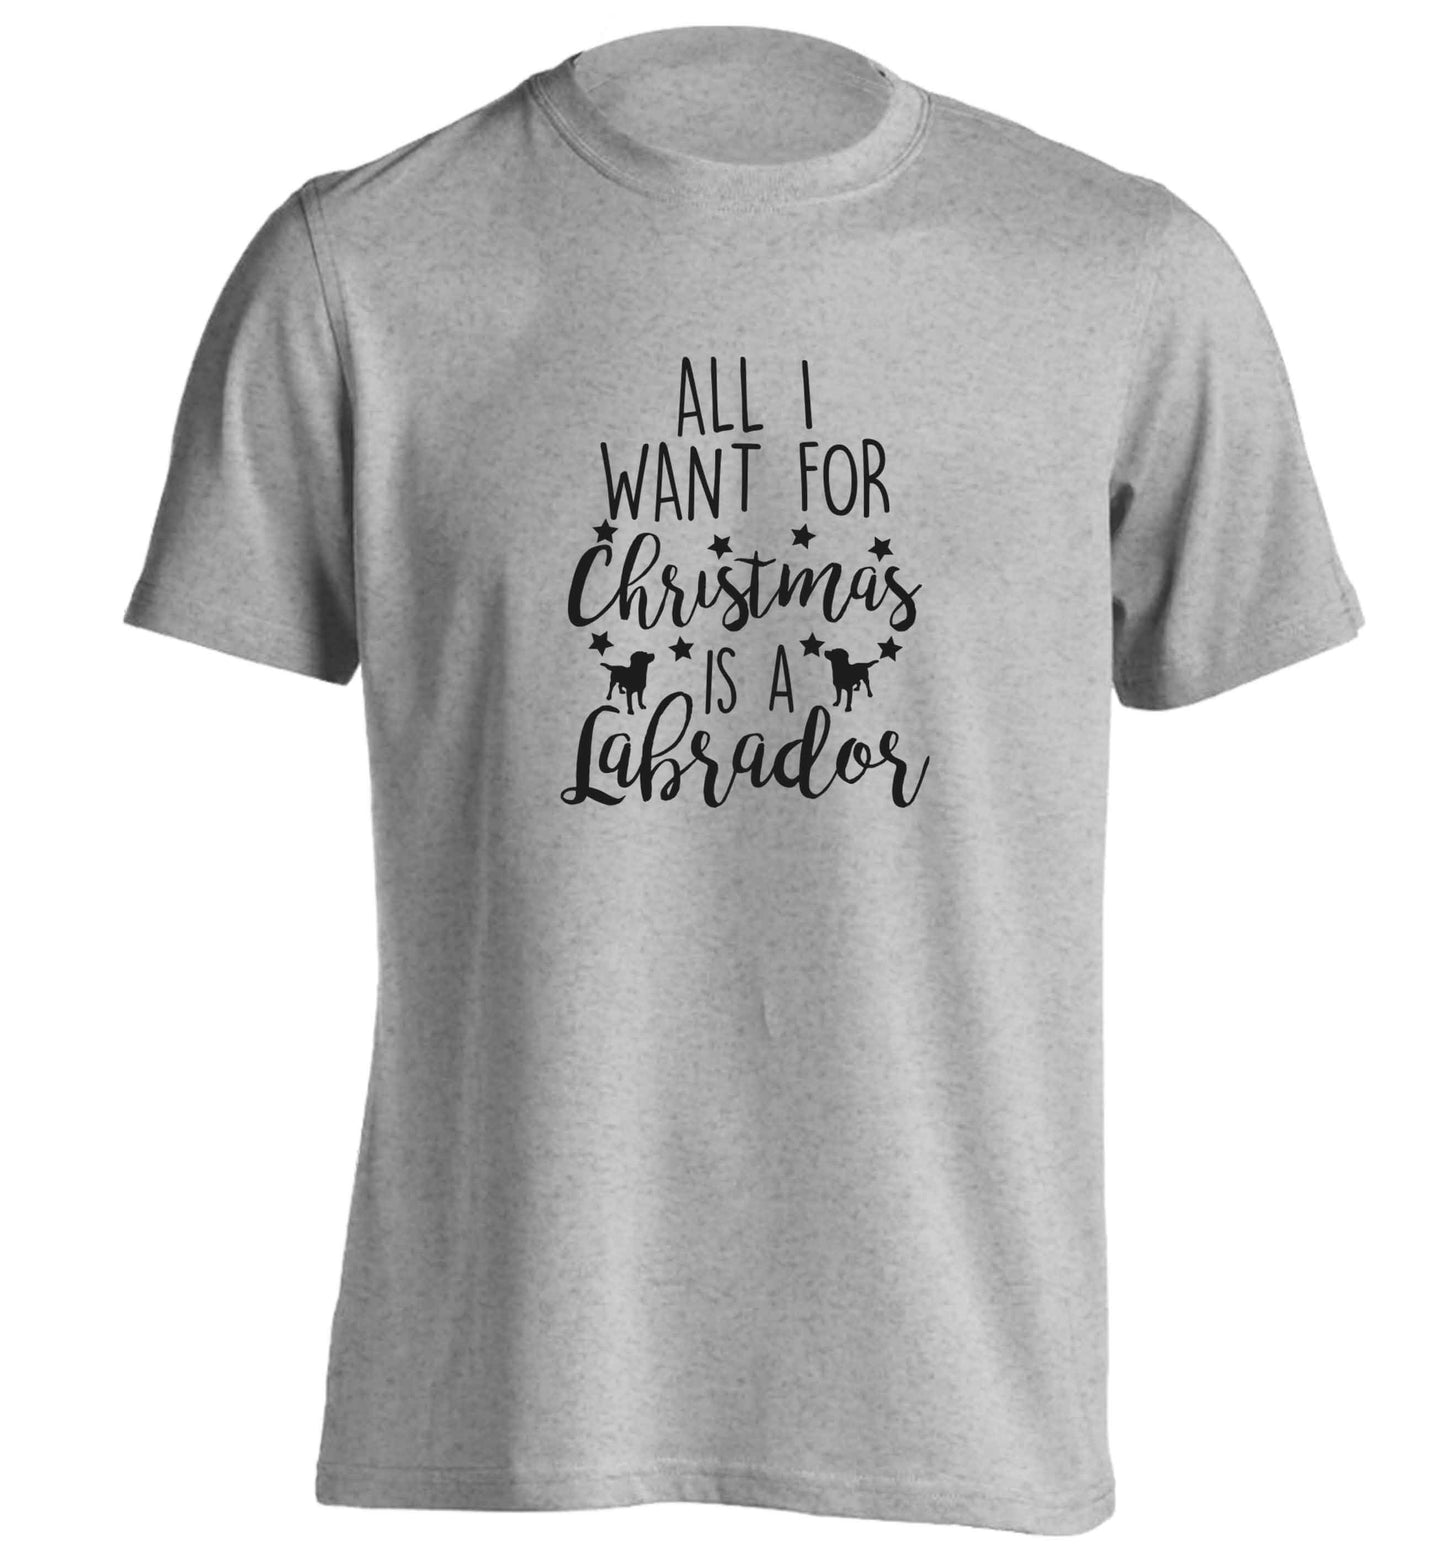 All I want for Christmas is a labrador adults unisex grey Tshirt 2XL